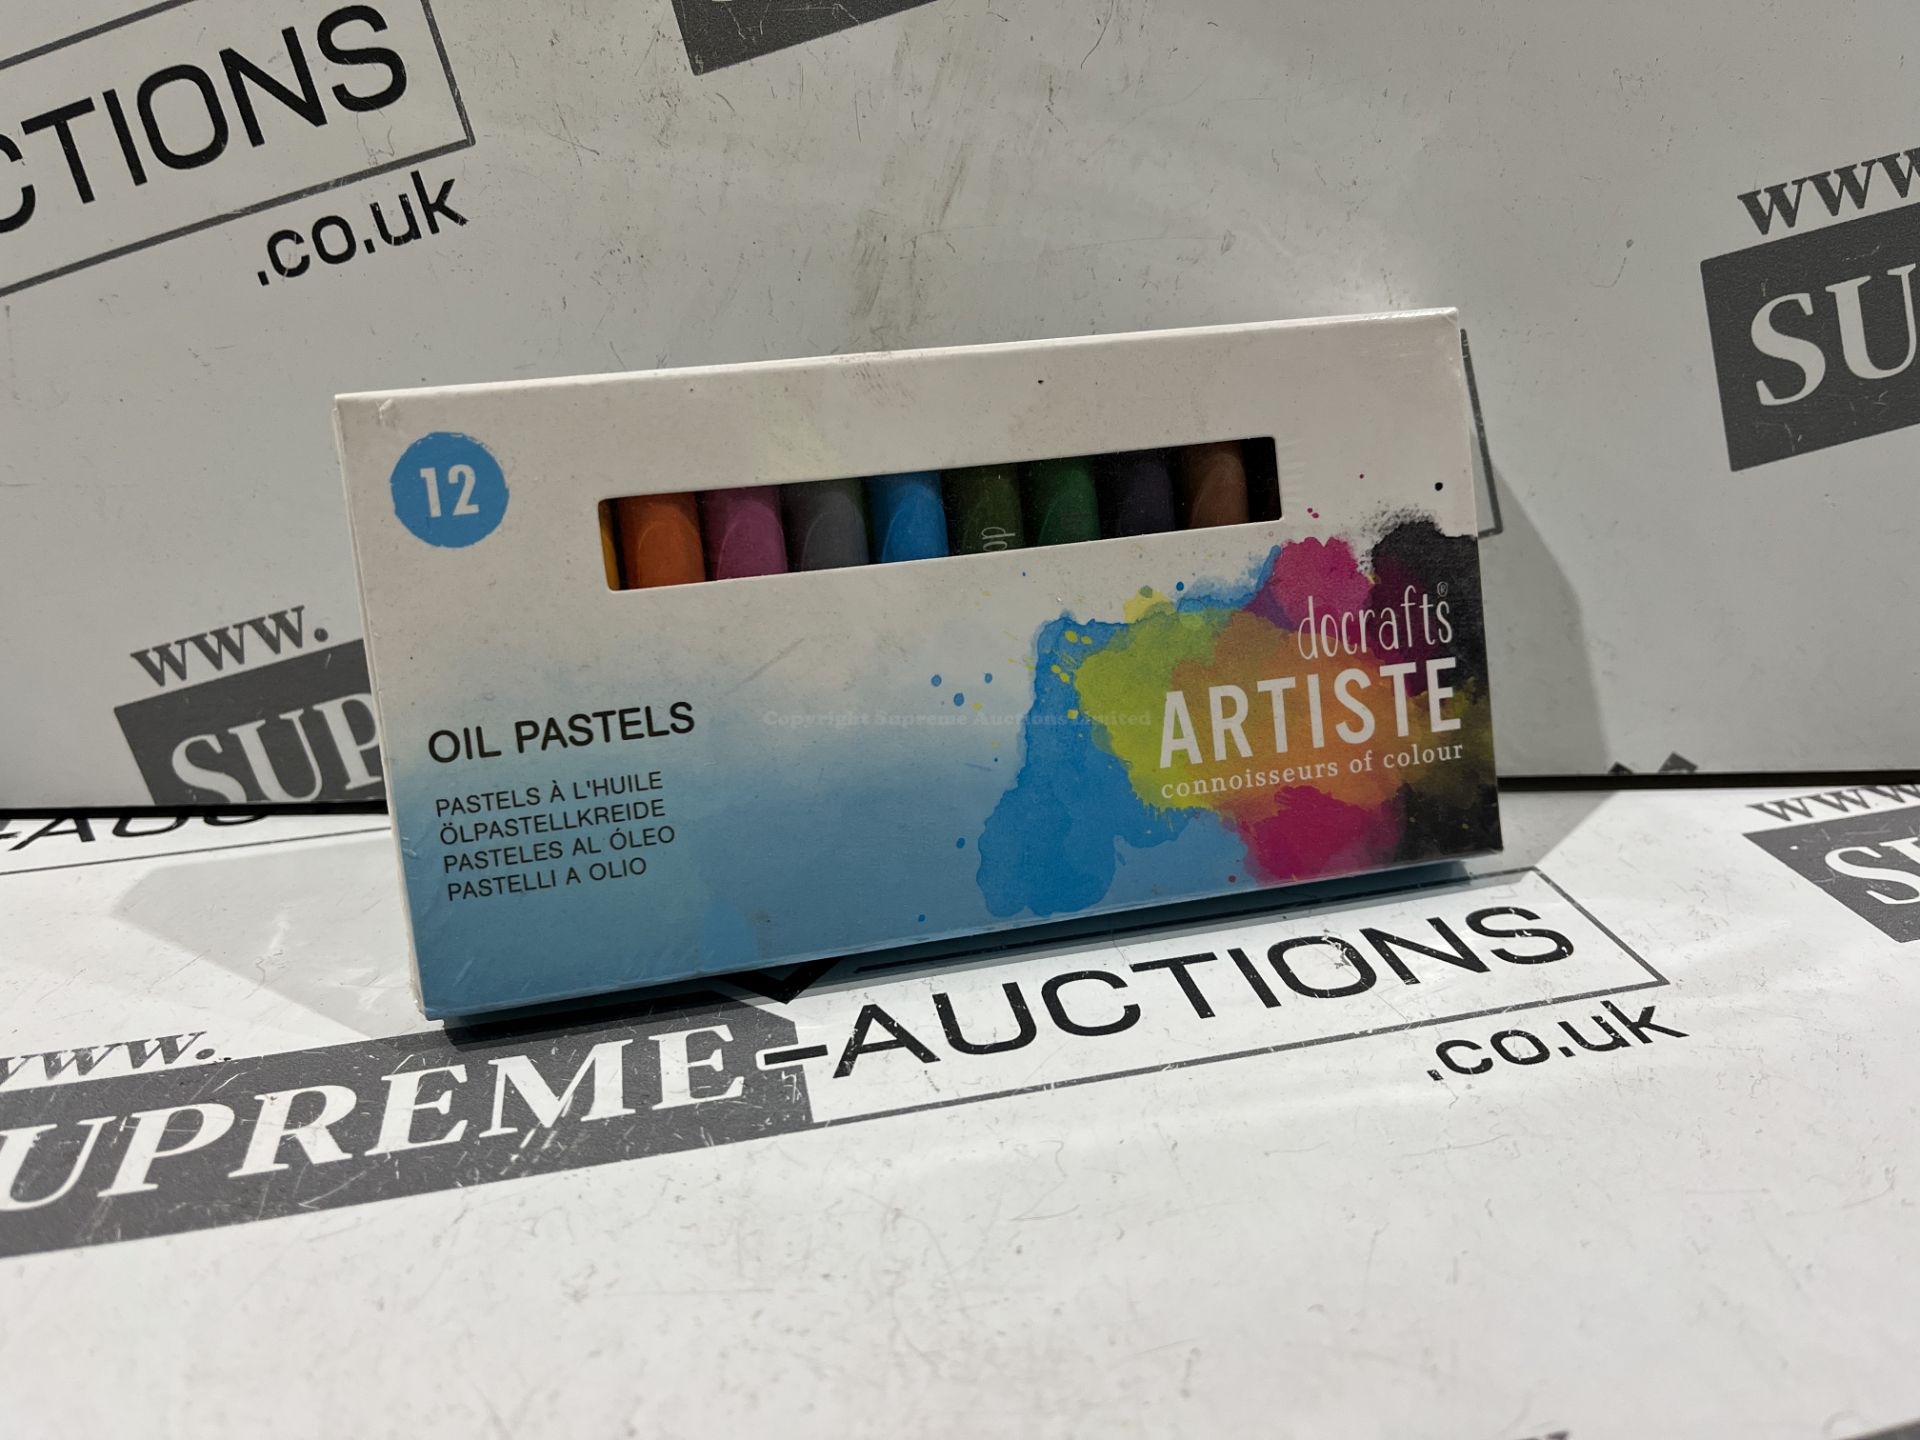 50 X BRAND NEW PACKS OF DOCRAFTS ARTISTE ASSORTED OIL PASTELS R9-7